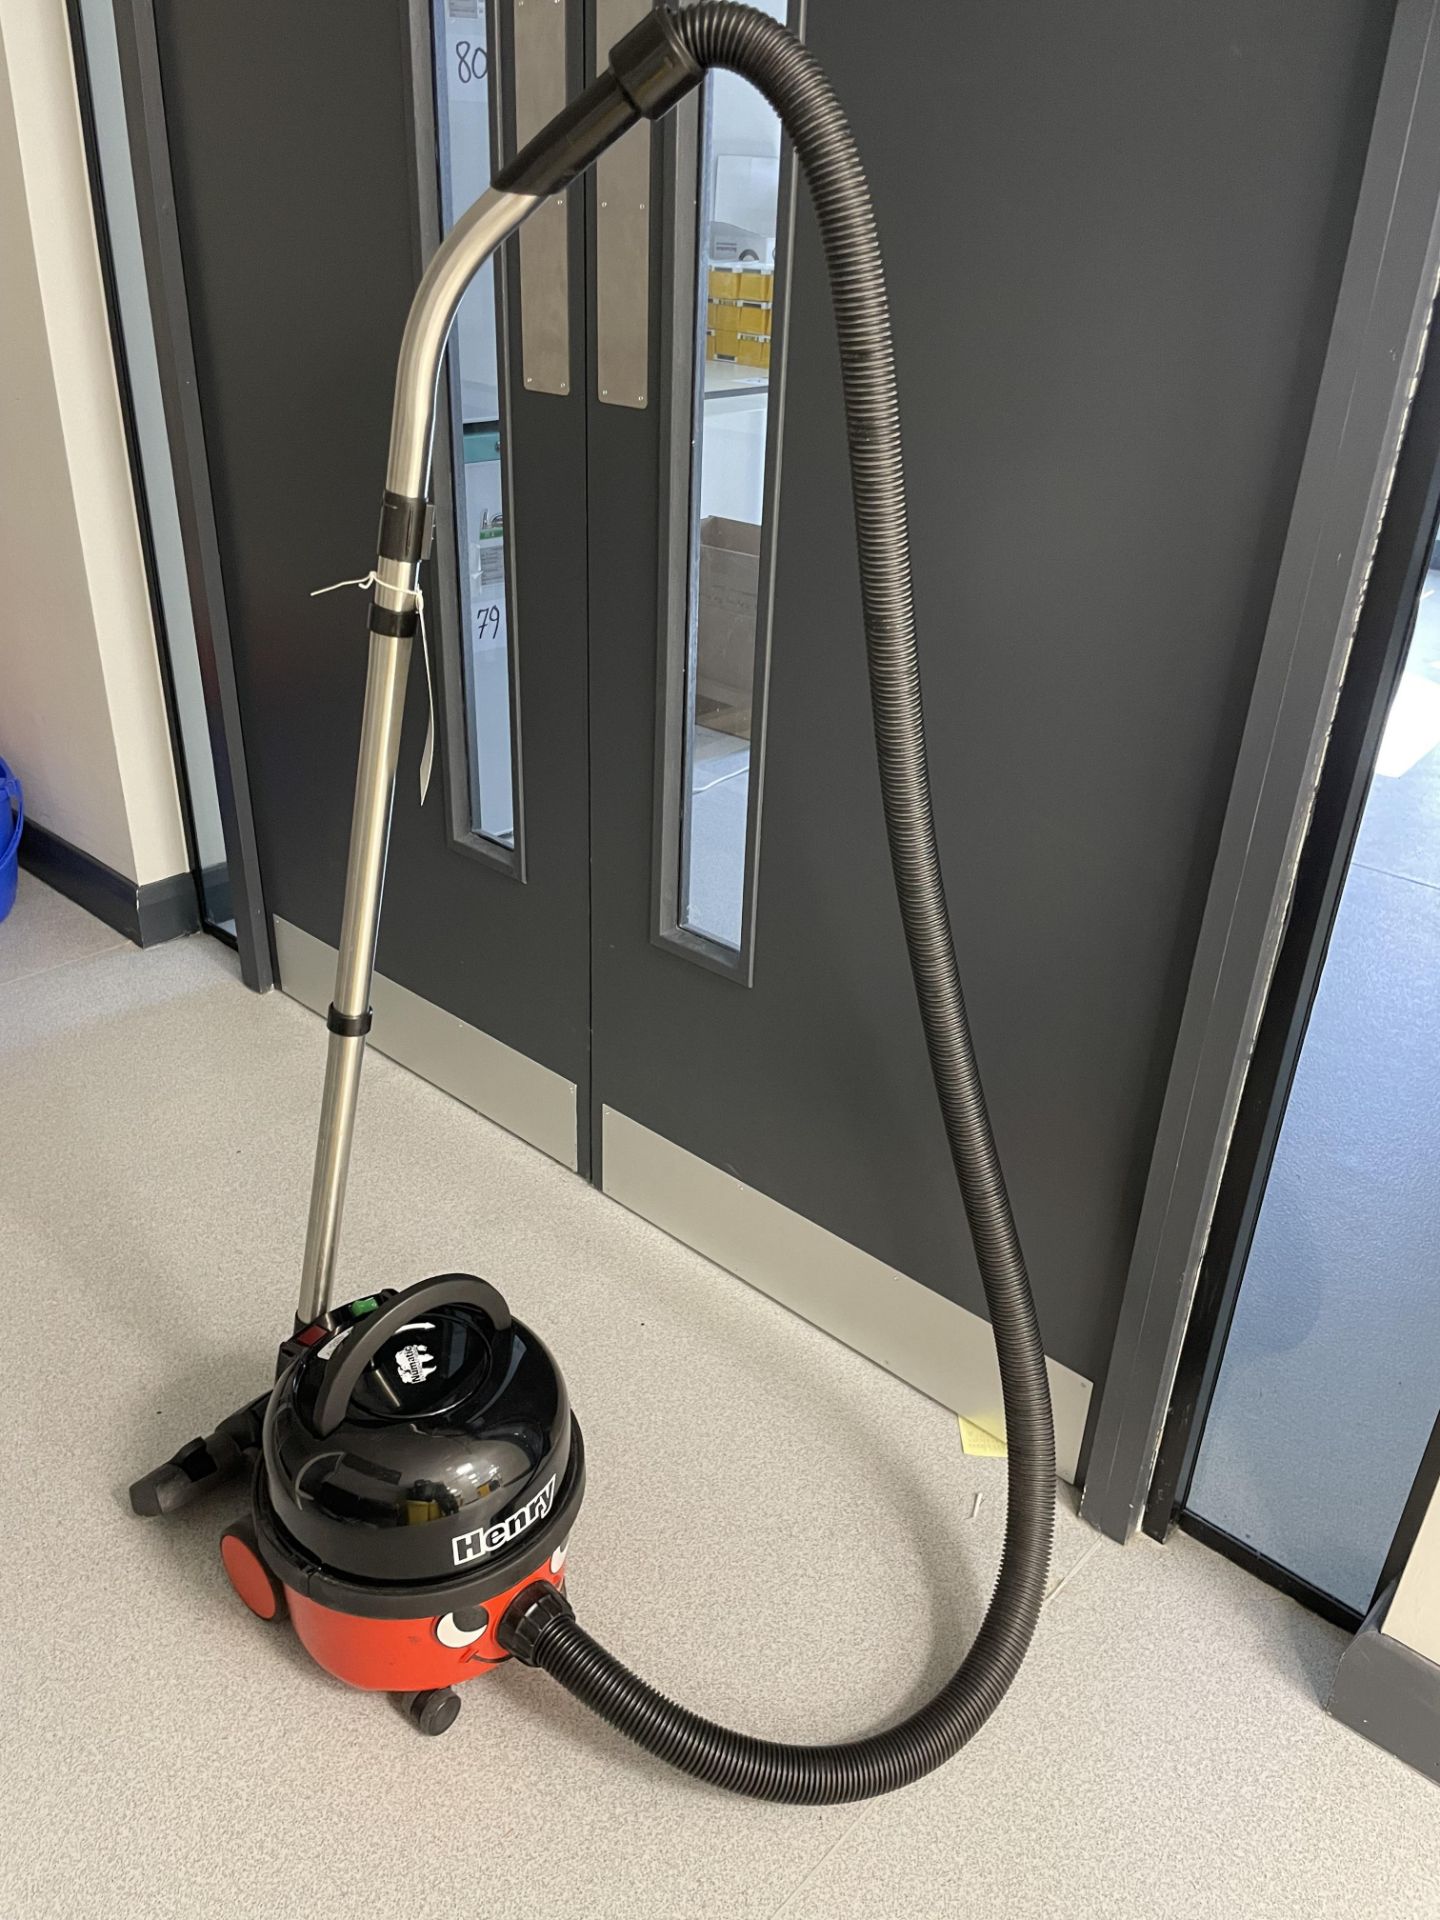 A Numatic HVR160-11 Henry type vacuum cleaner.